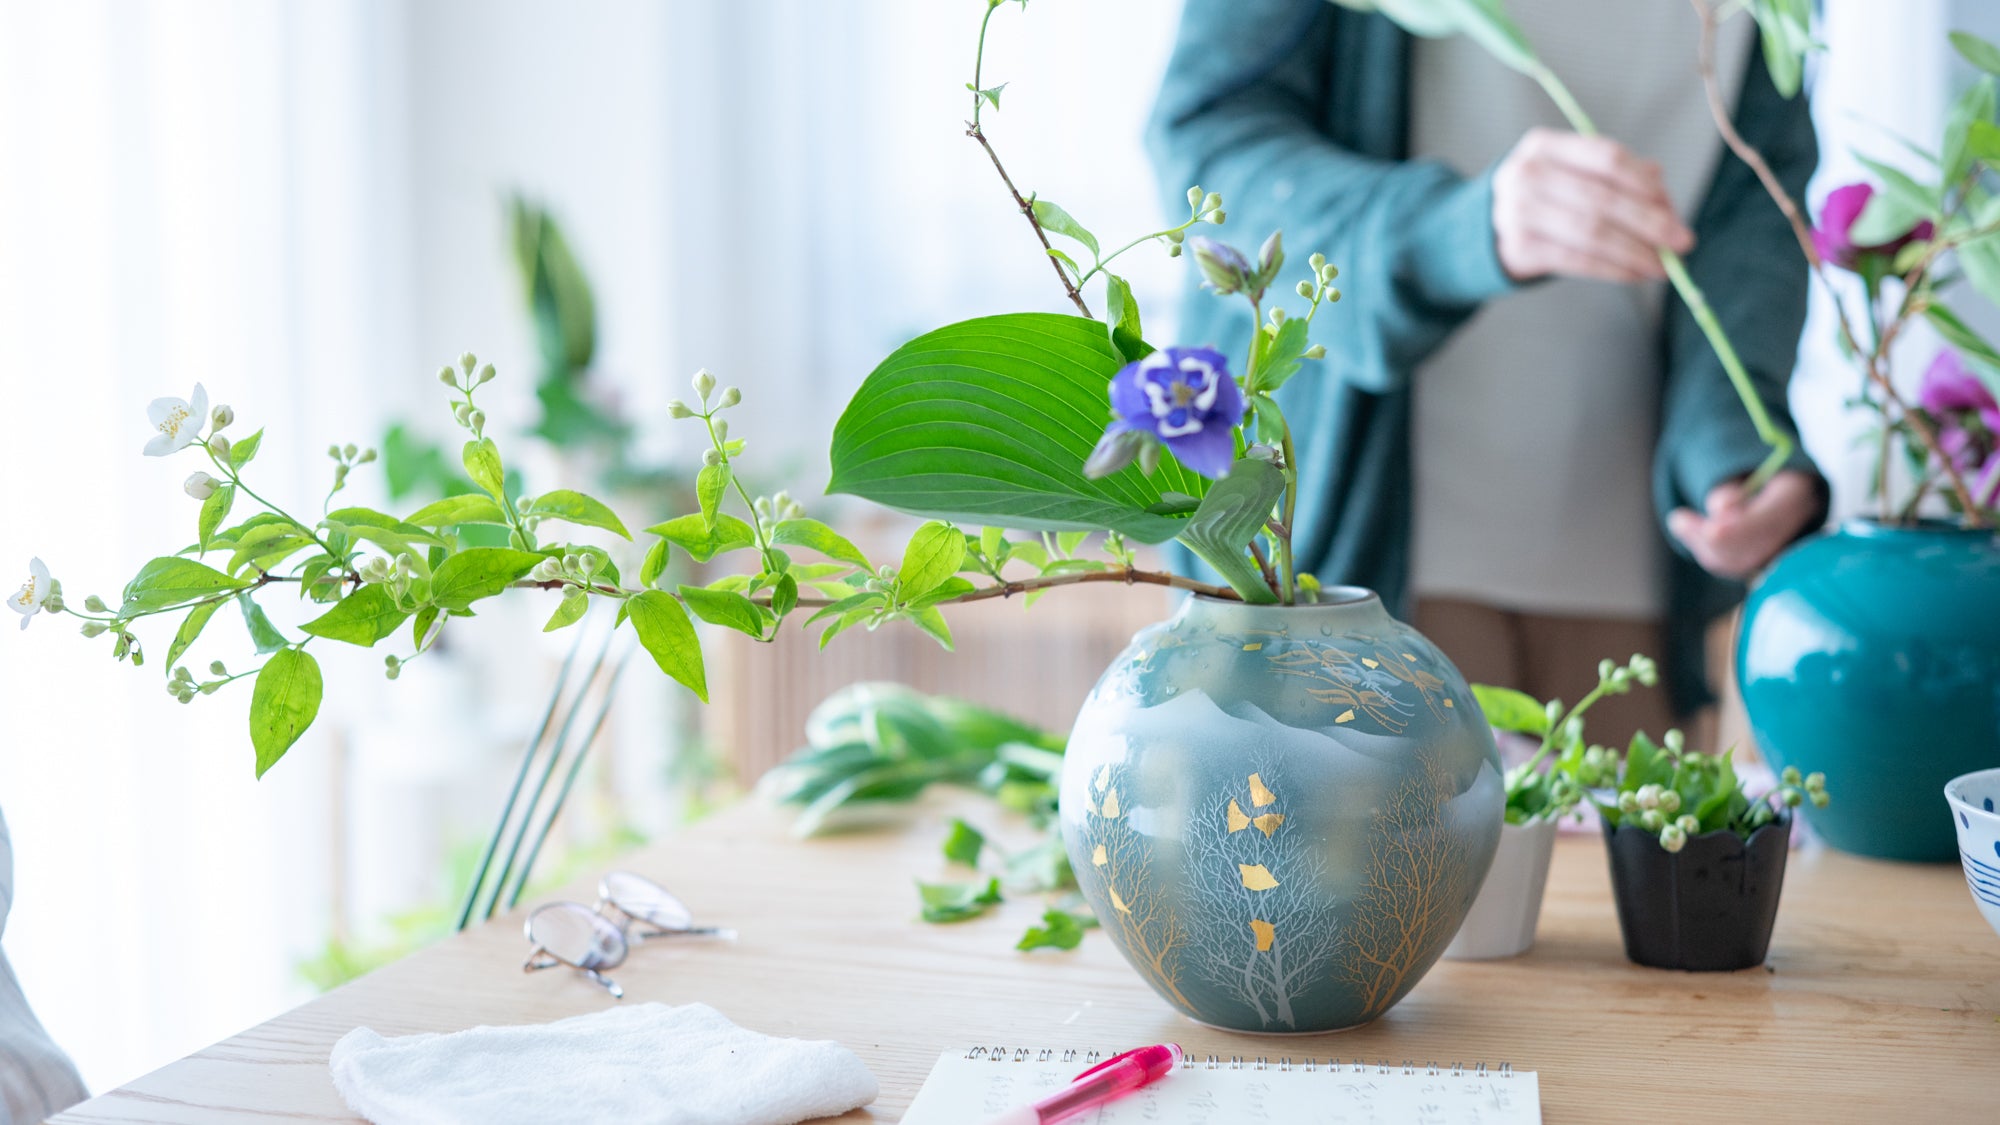 A Step-by-Step Guide to Ikebana Beginners - Part 1